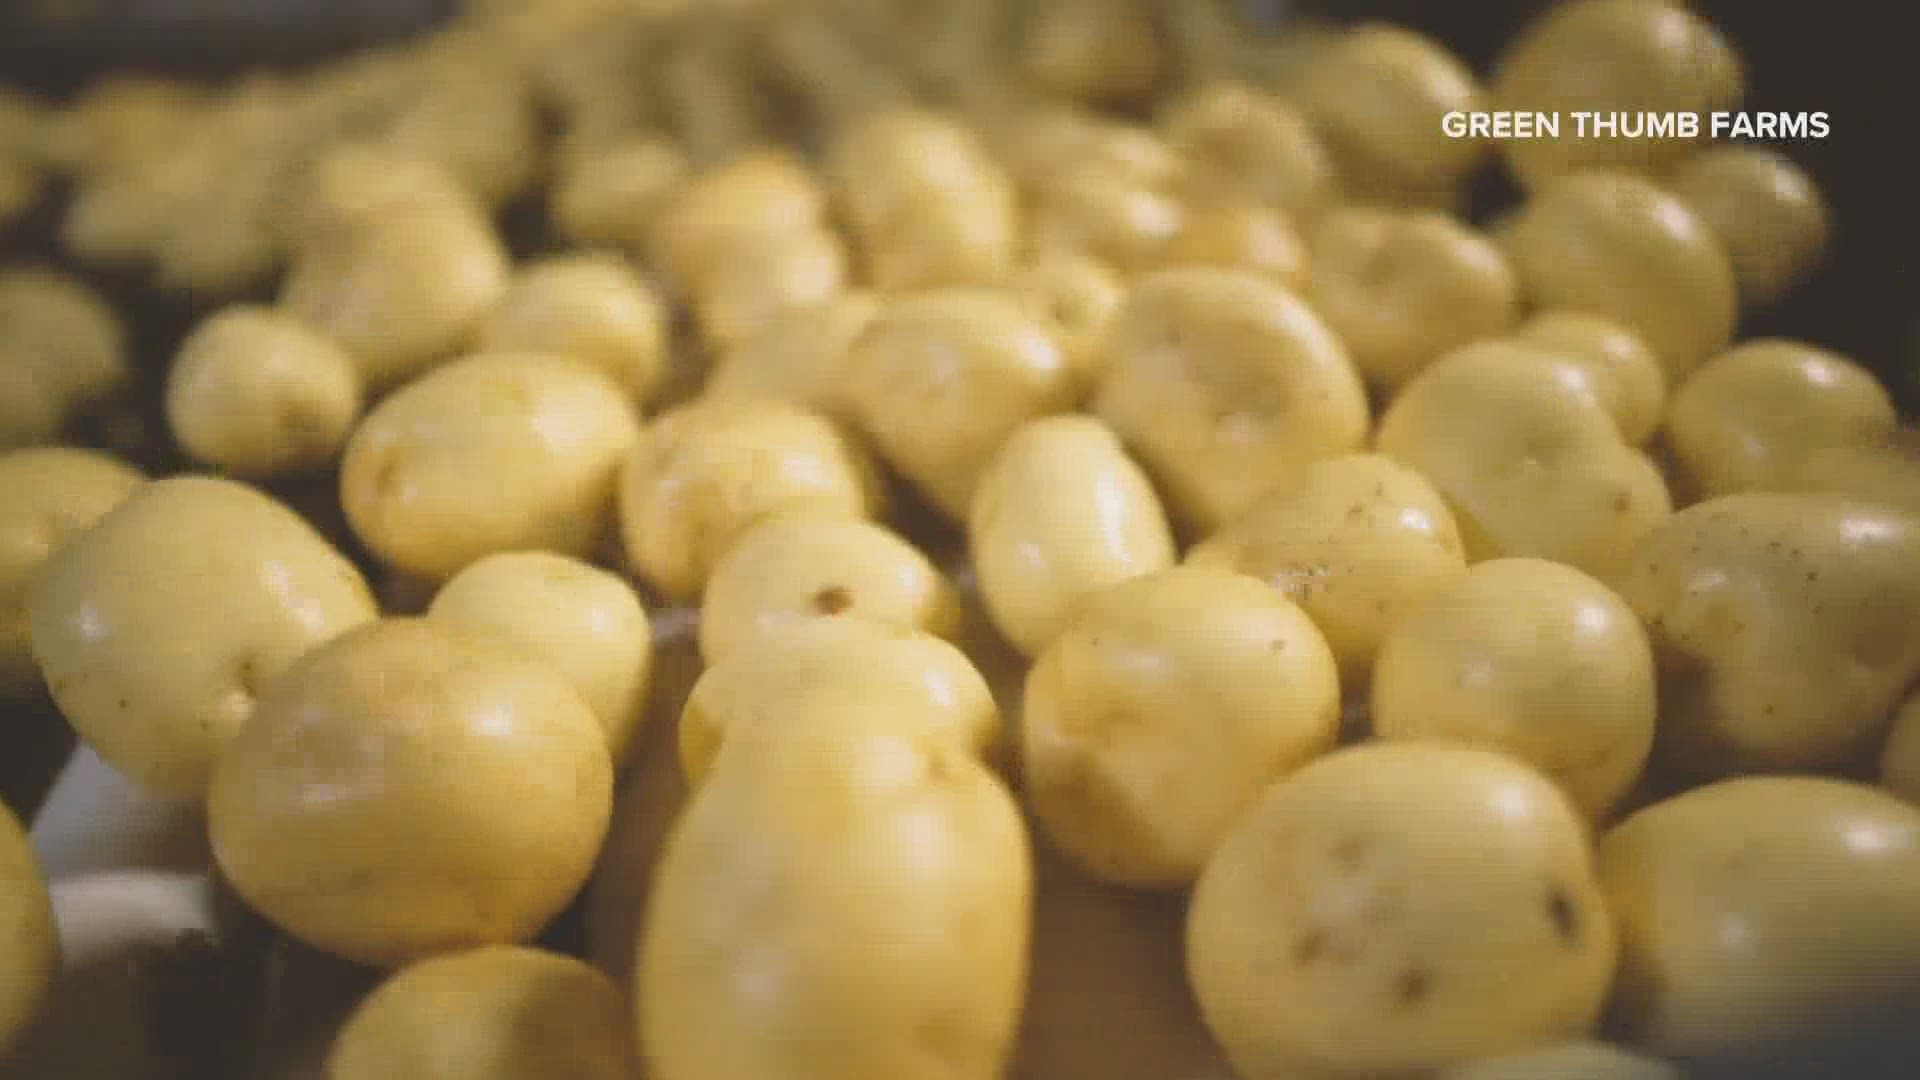 According to numbers from the Maine Potato Board, 20% of Maine's total potato yield in 2020 was lost due to the drought conditions.